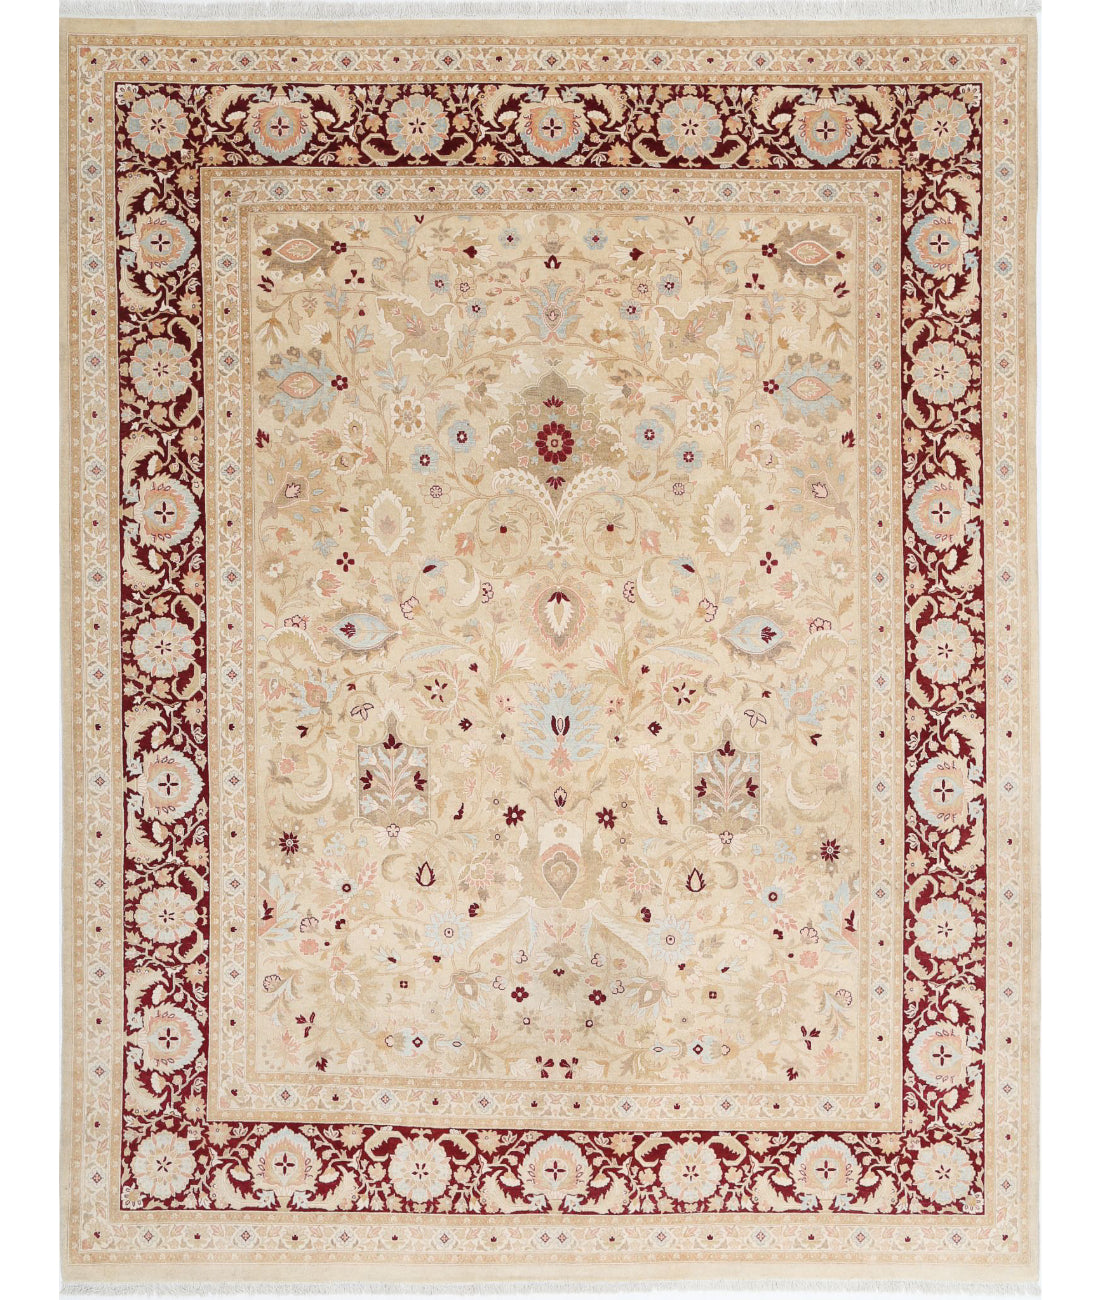 Hand Knotted Heritage Fine Persian Style Wool Rug - 8'1'' x 10'5'' 8'1'' x 10'5'' (243 X 313) / Beige / Burgundy